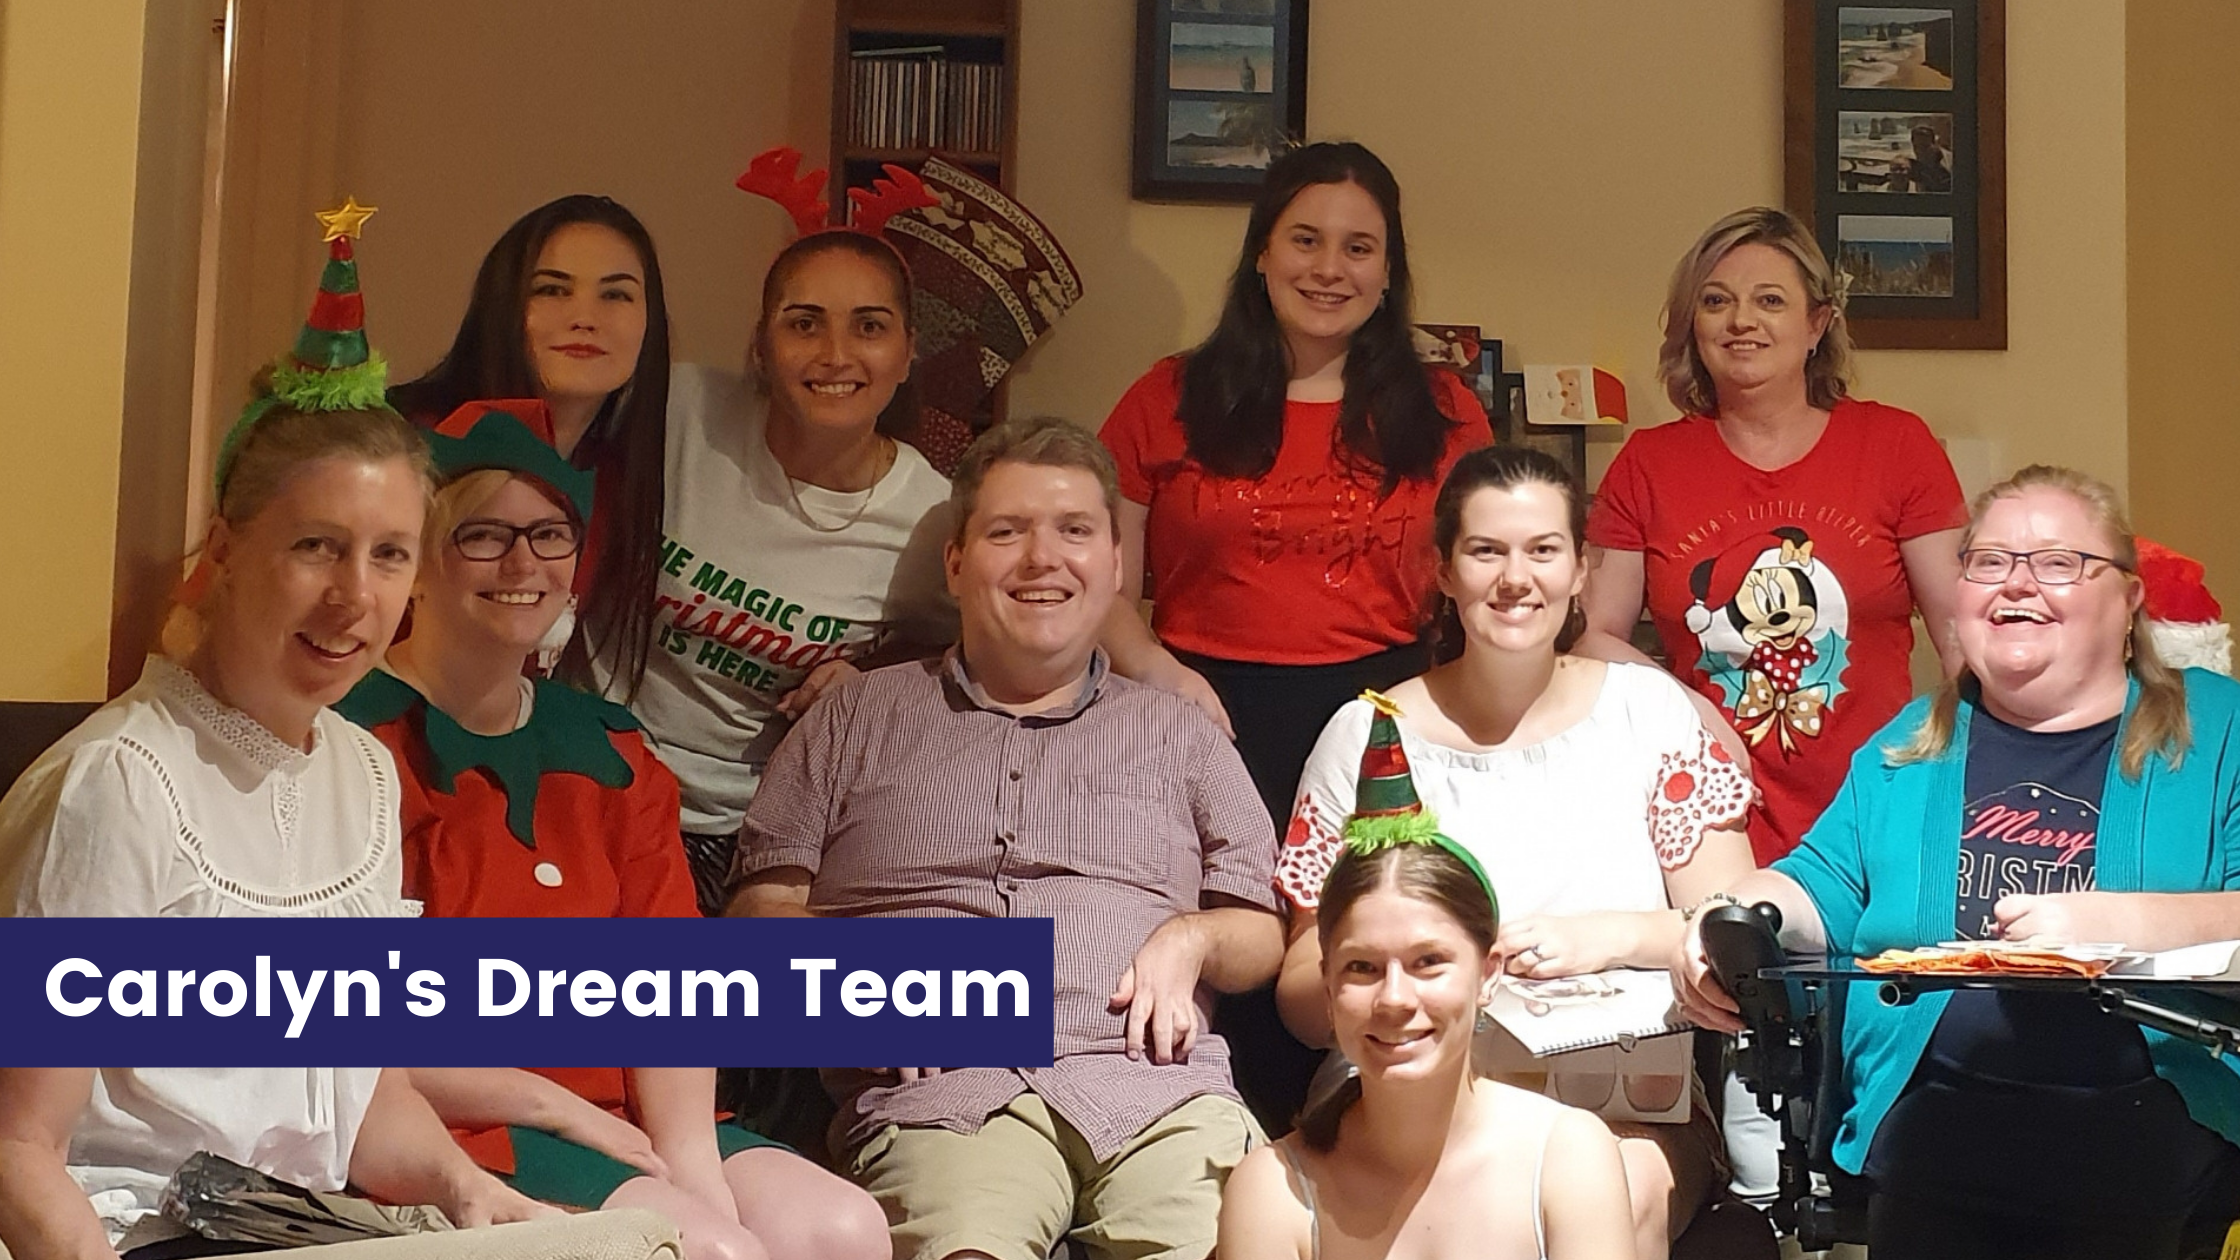 Carolyns  Dream Team - Carolyn and her partner surrounded by 8 people in Christmas costumes